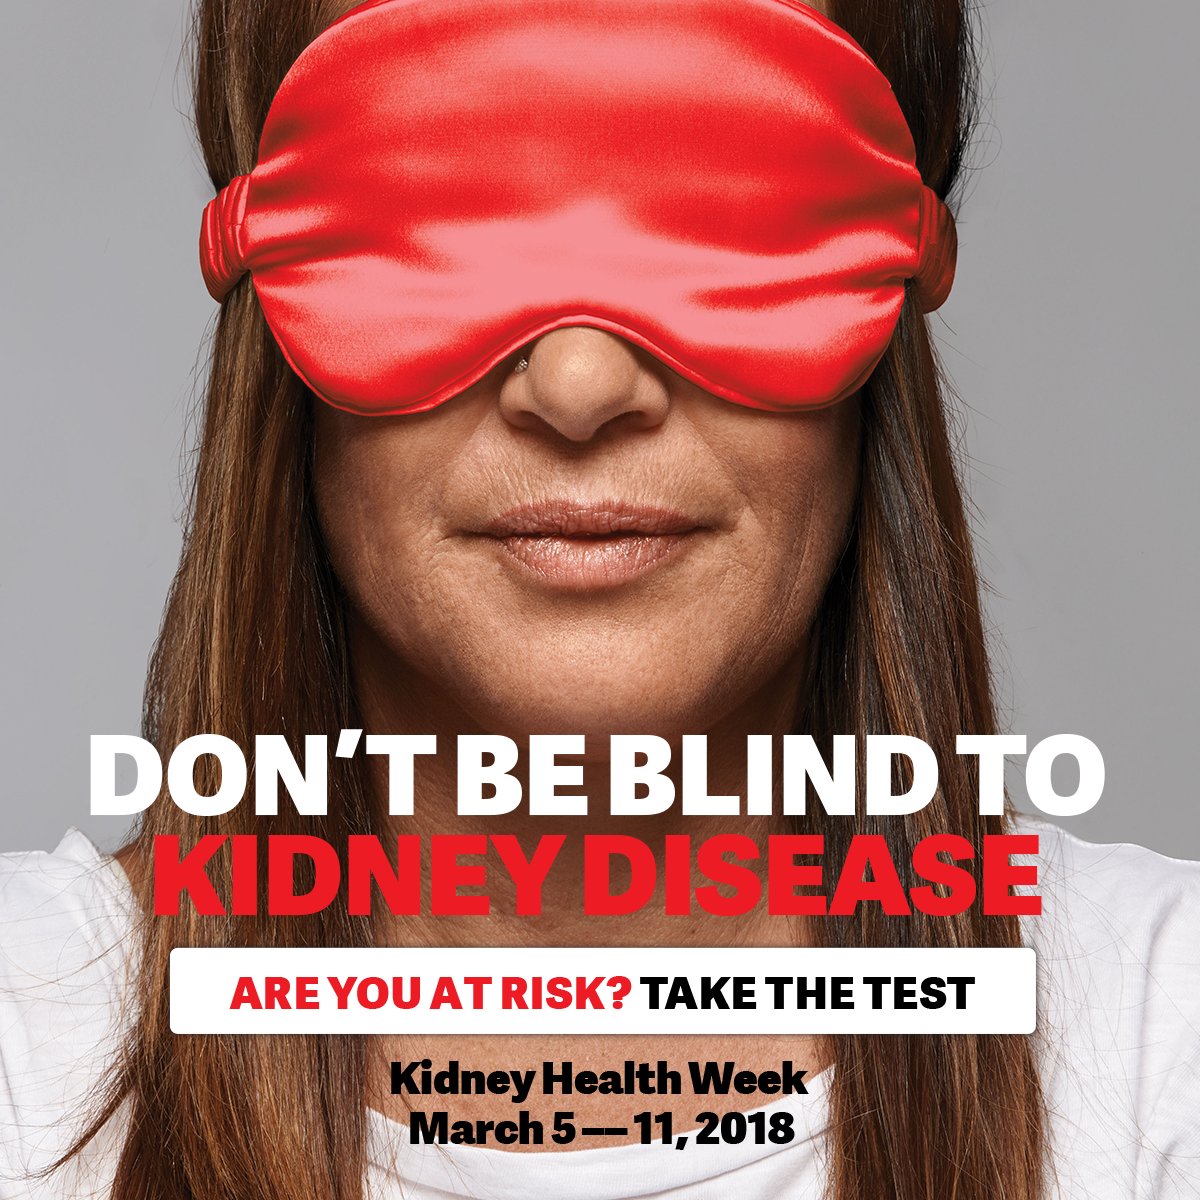 It’s #KHW18 and @KidneyHealth Australia wants you to find out if you’re the 1 in 3 at risk. Don’t be blind to kidney disease by waiting until you feel sick. Take the #KidneyRiskTest and #DonateLife. goo.gl/7TZgw3